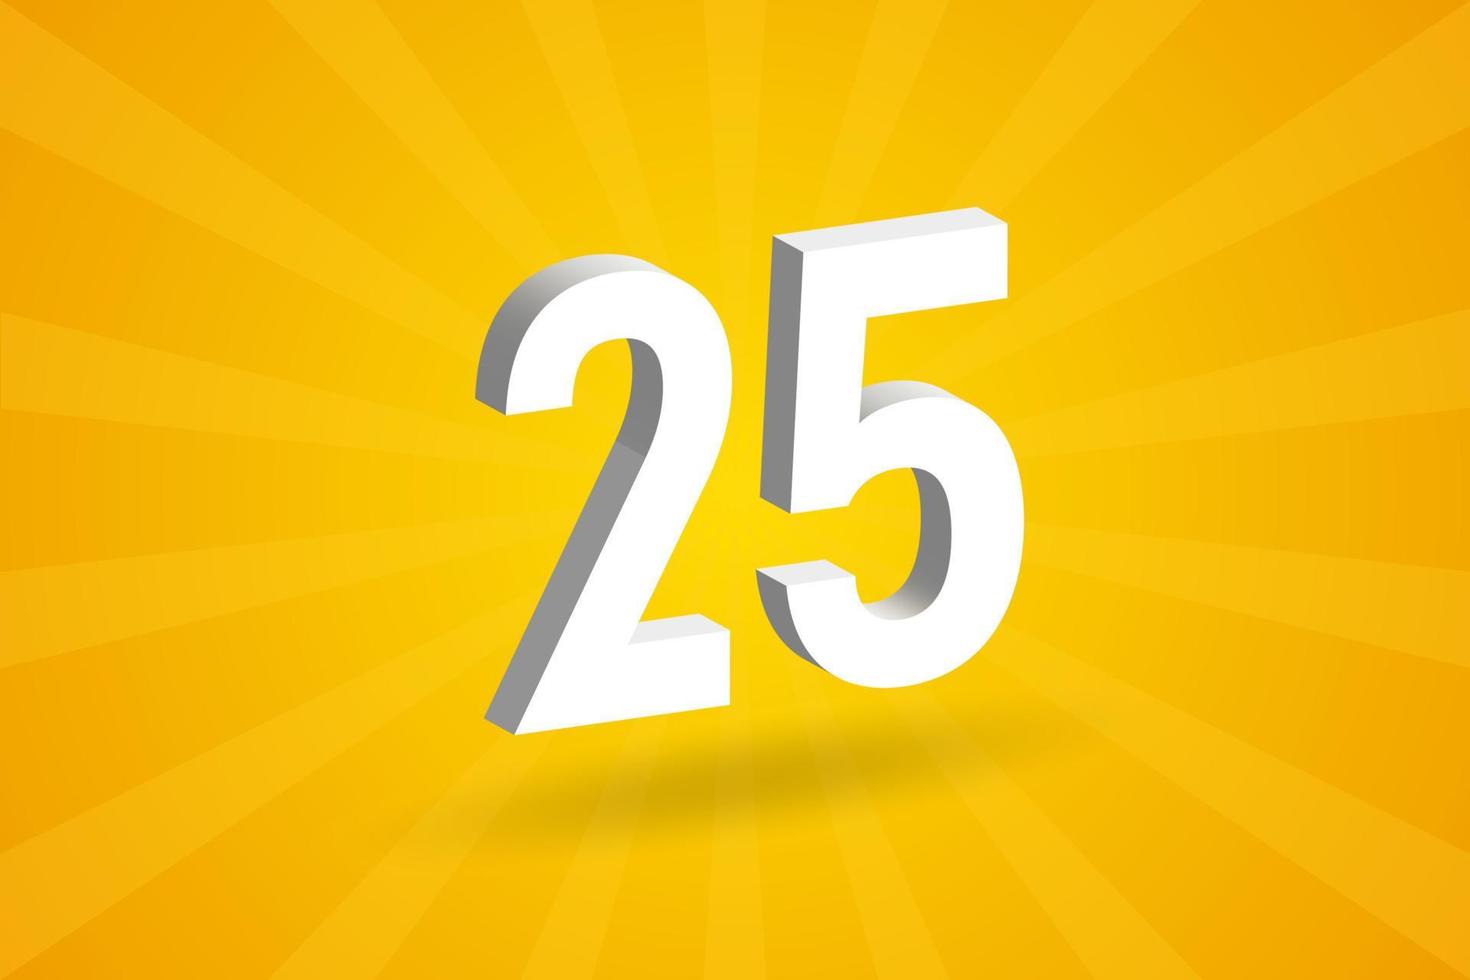 3D 25 number font alphabet. White 3D Number 25 with yellow background vector